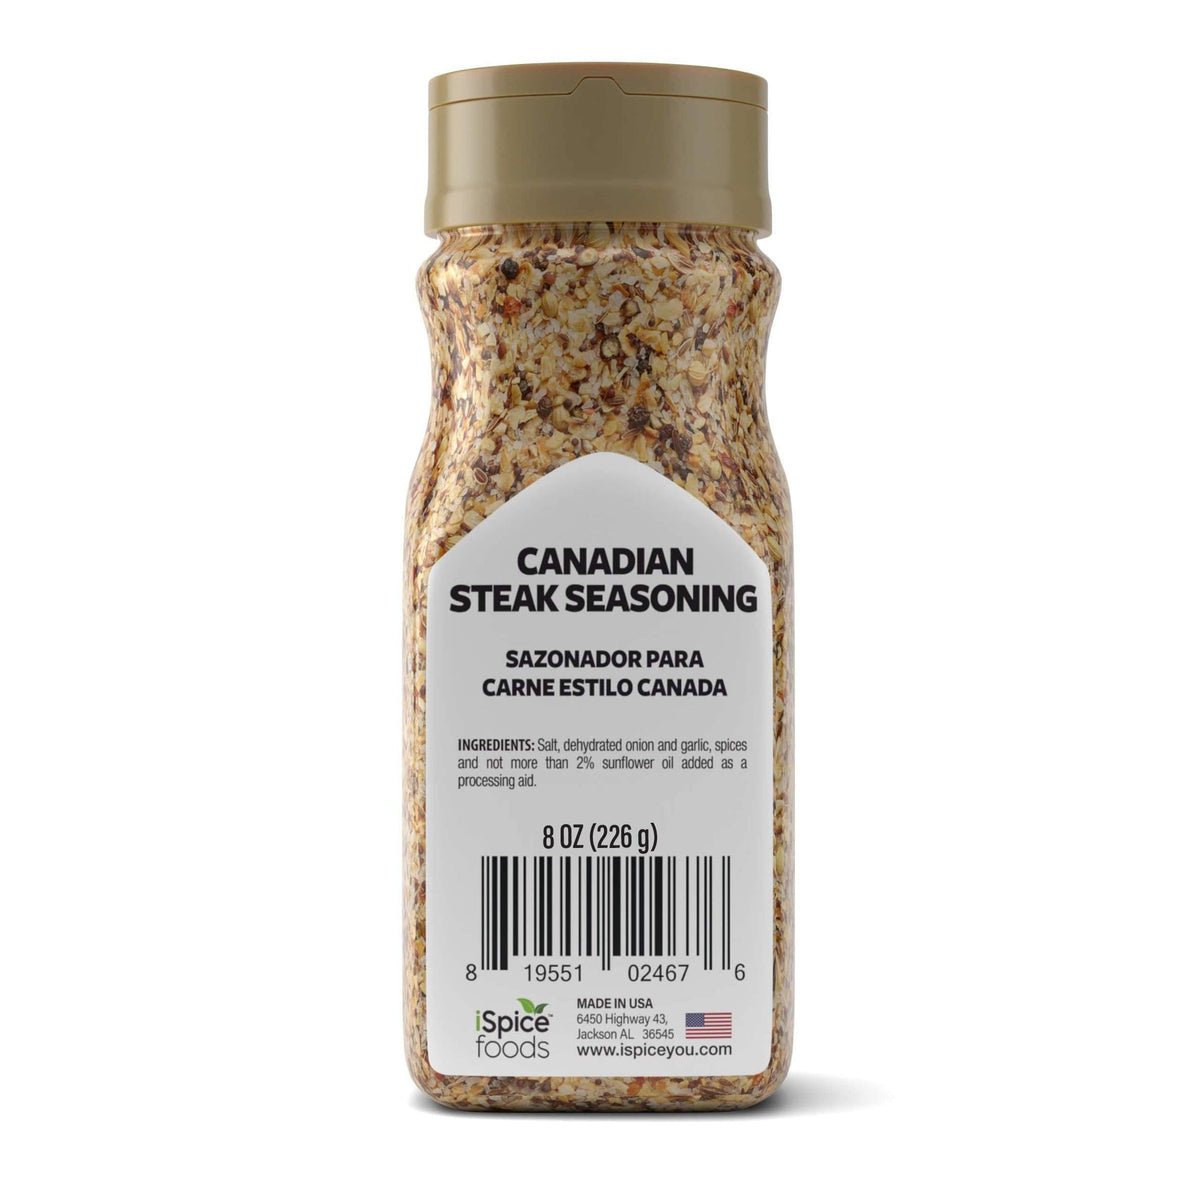 Take Your Steak To The Next Level with Canadian Steak Seasoning